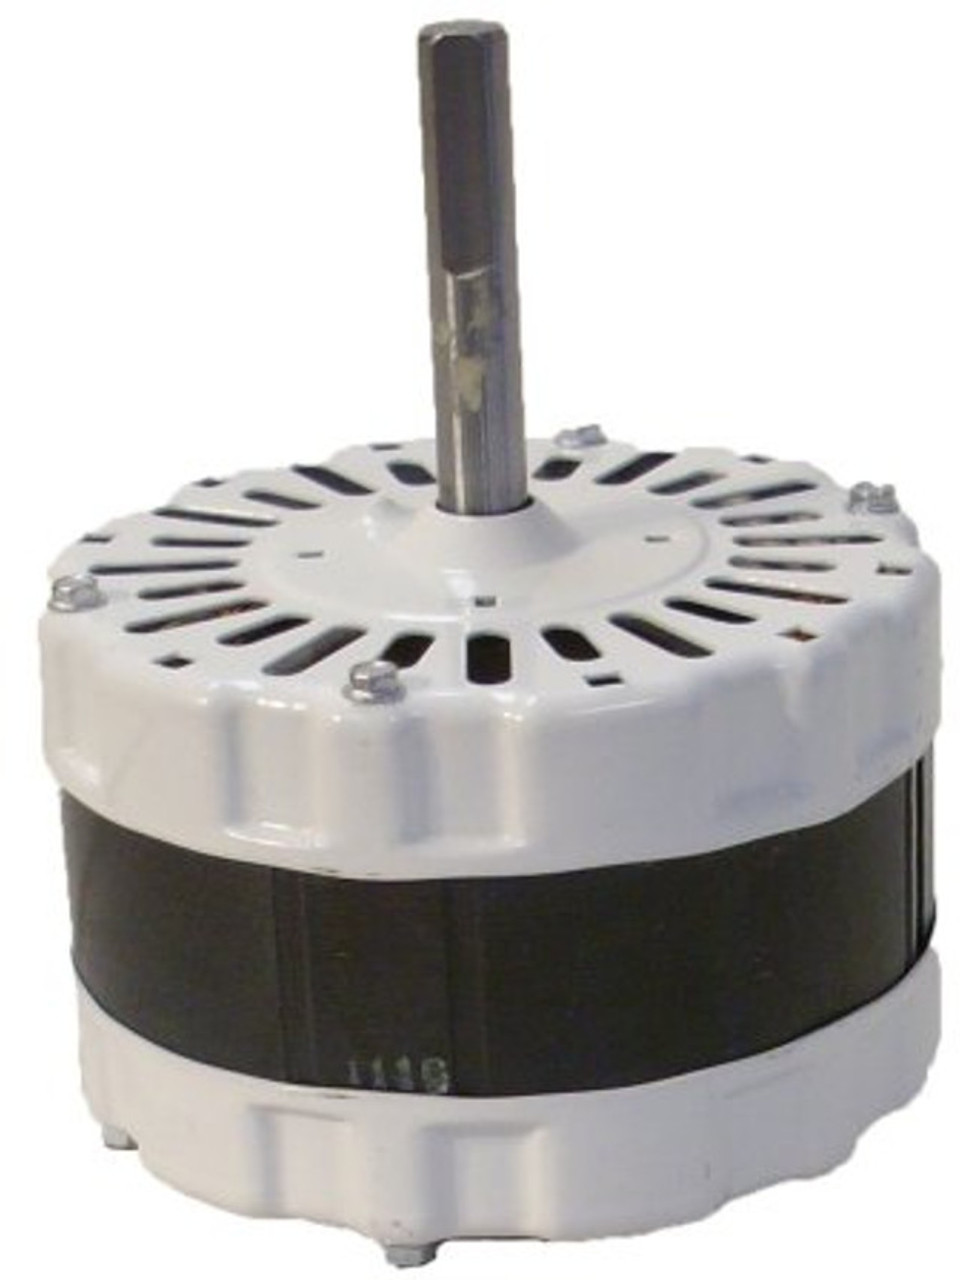 87404 Nutone Replacement White Motor For WF37, WF57NR; 4.9 amps, 1200 RPM 115 Volts